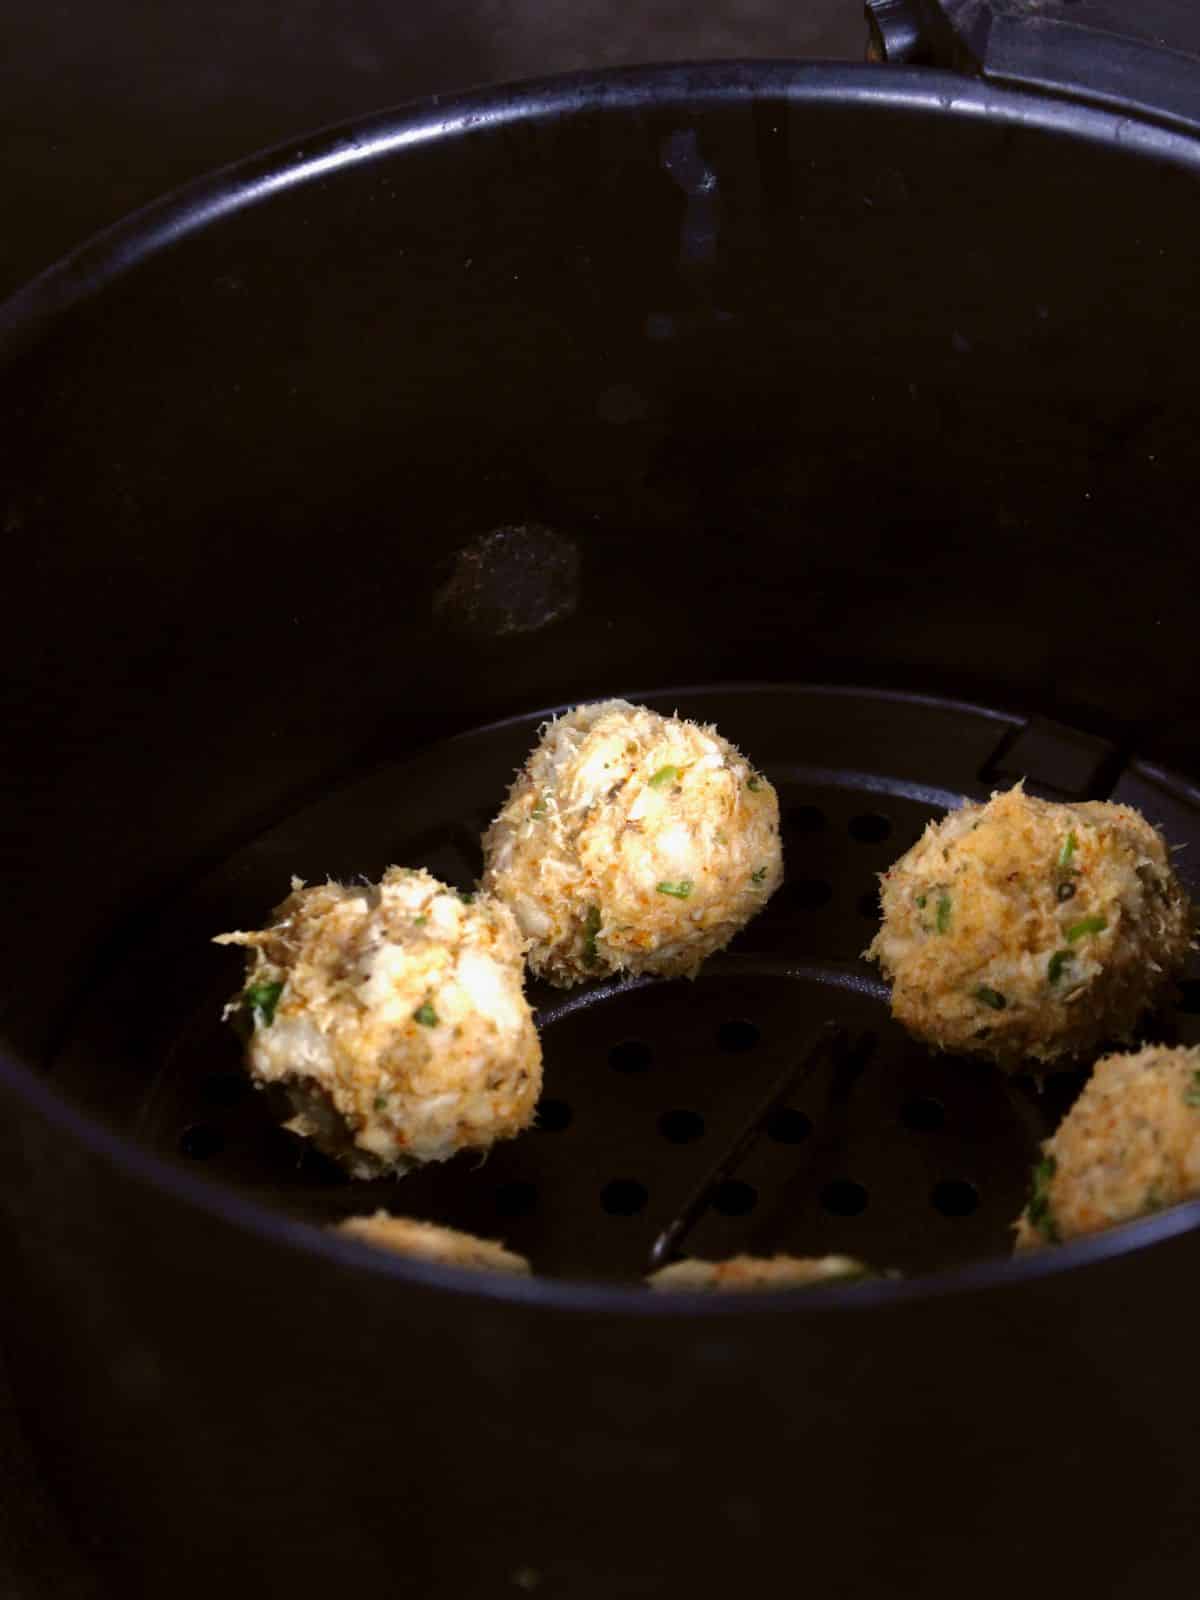 small balls made out of mash transferred into an air fryer